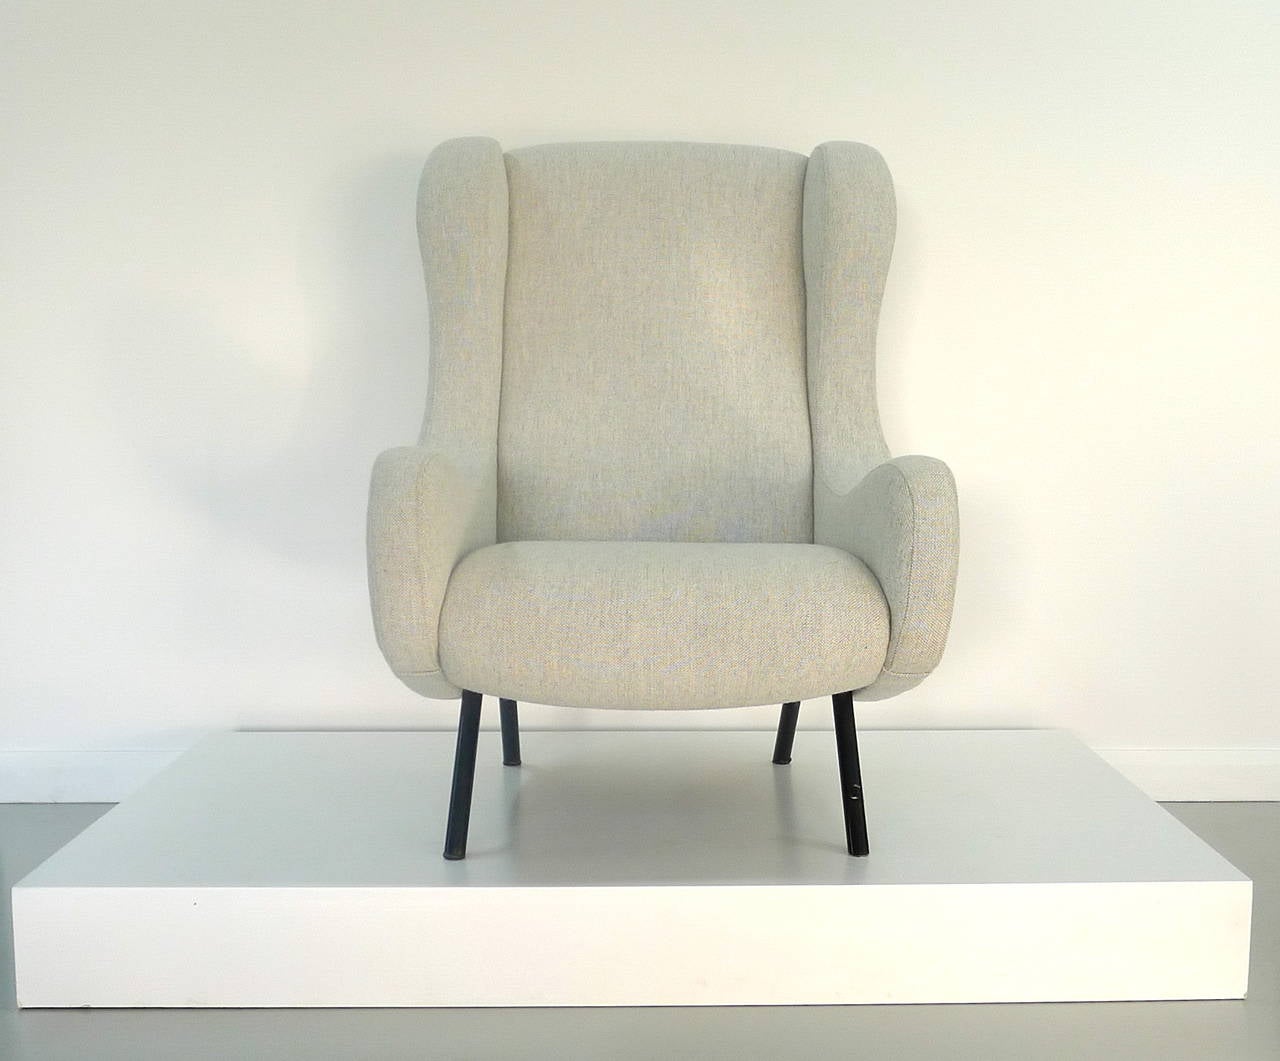 Marco Zanuso for Arflex, Italy, 1951. Senior chair newly reformed and reupholstered in top quality grey or cream Hallingdal fabric by Kvadrat. Extremely comfortable Mid-Century armchair.